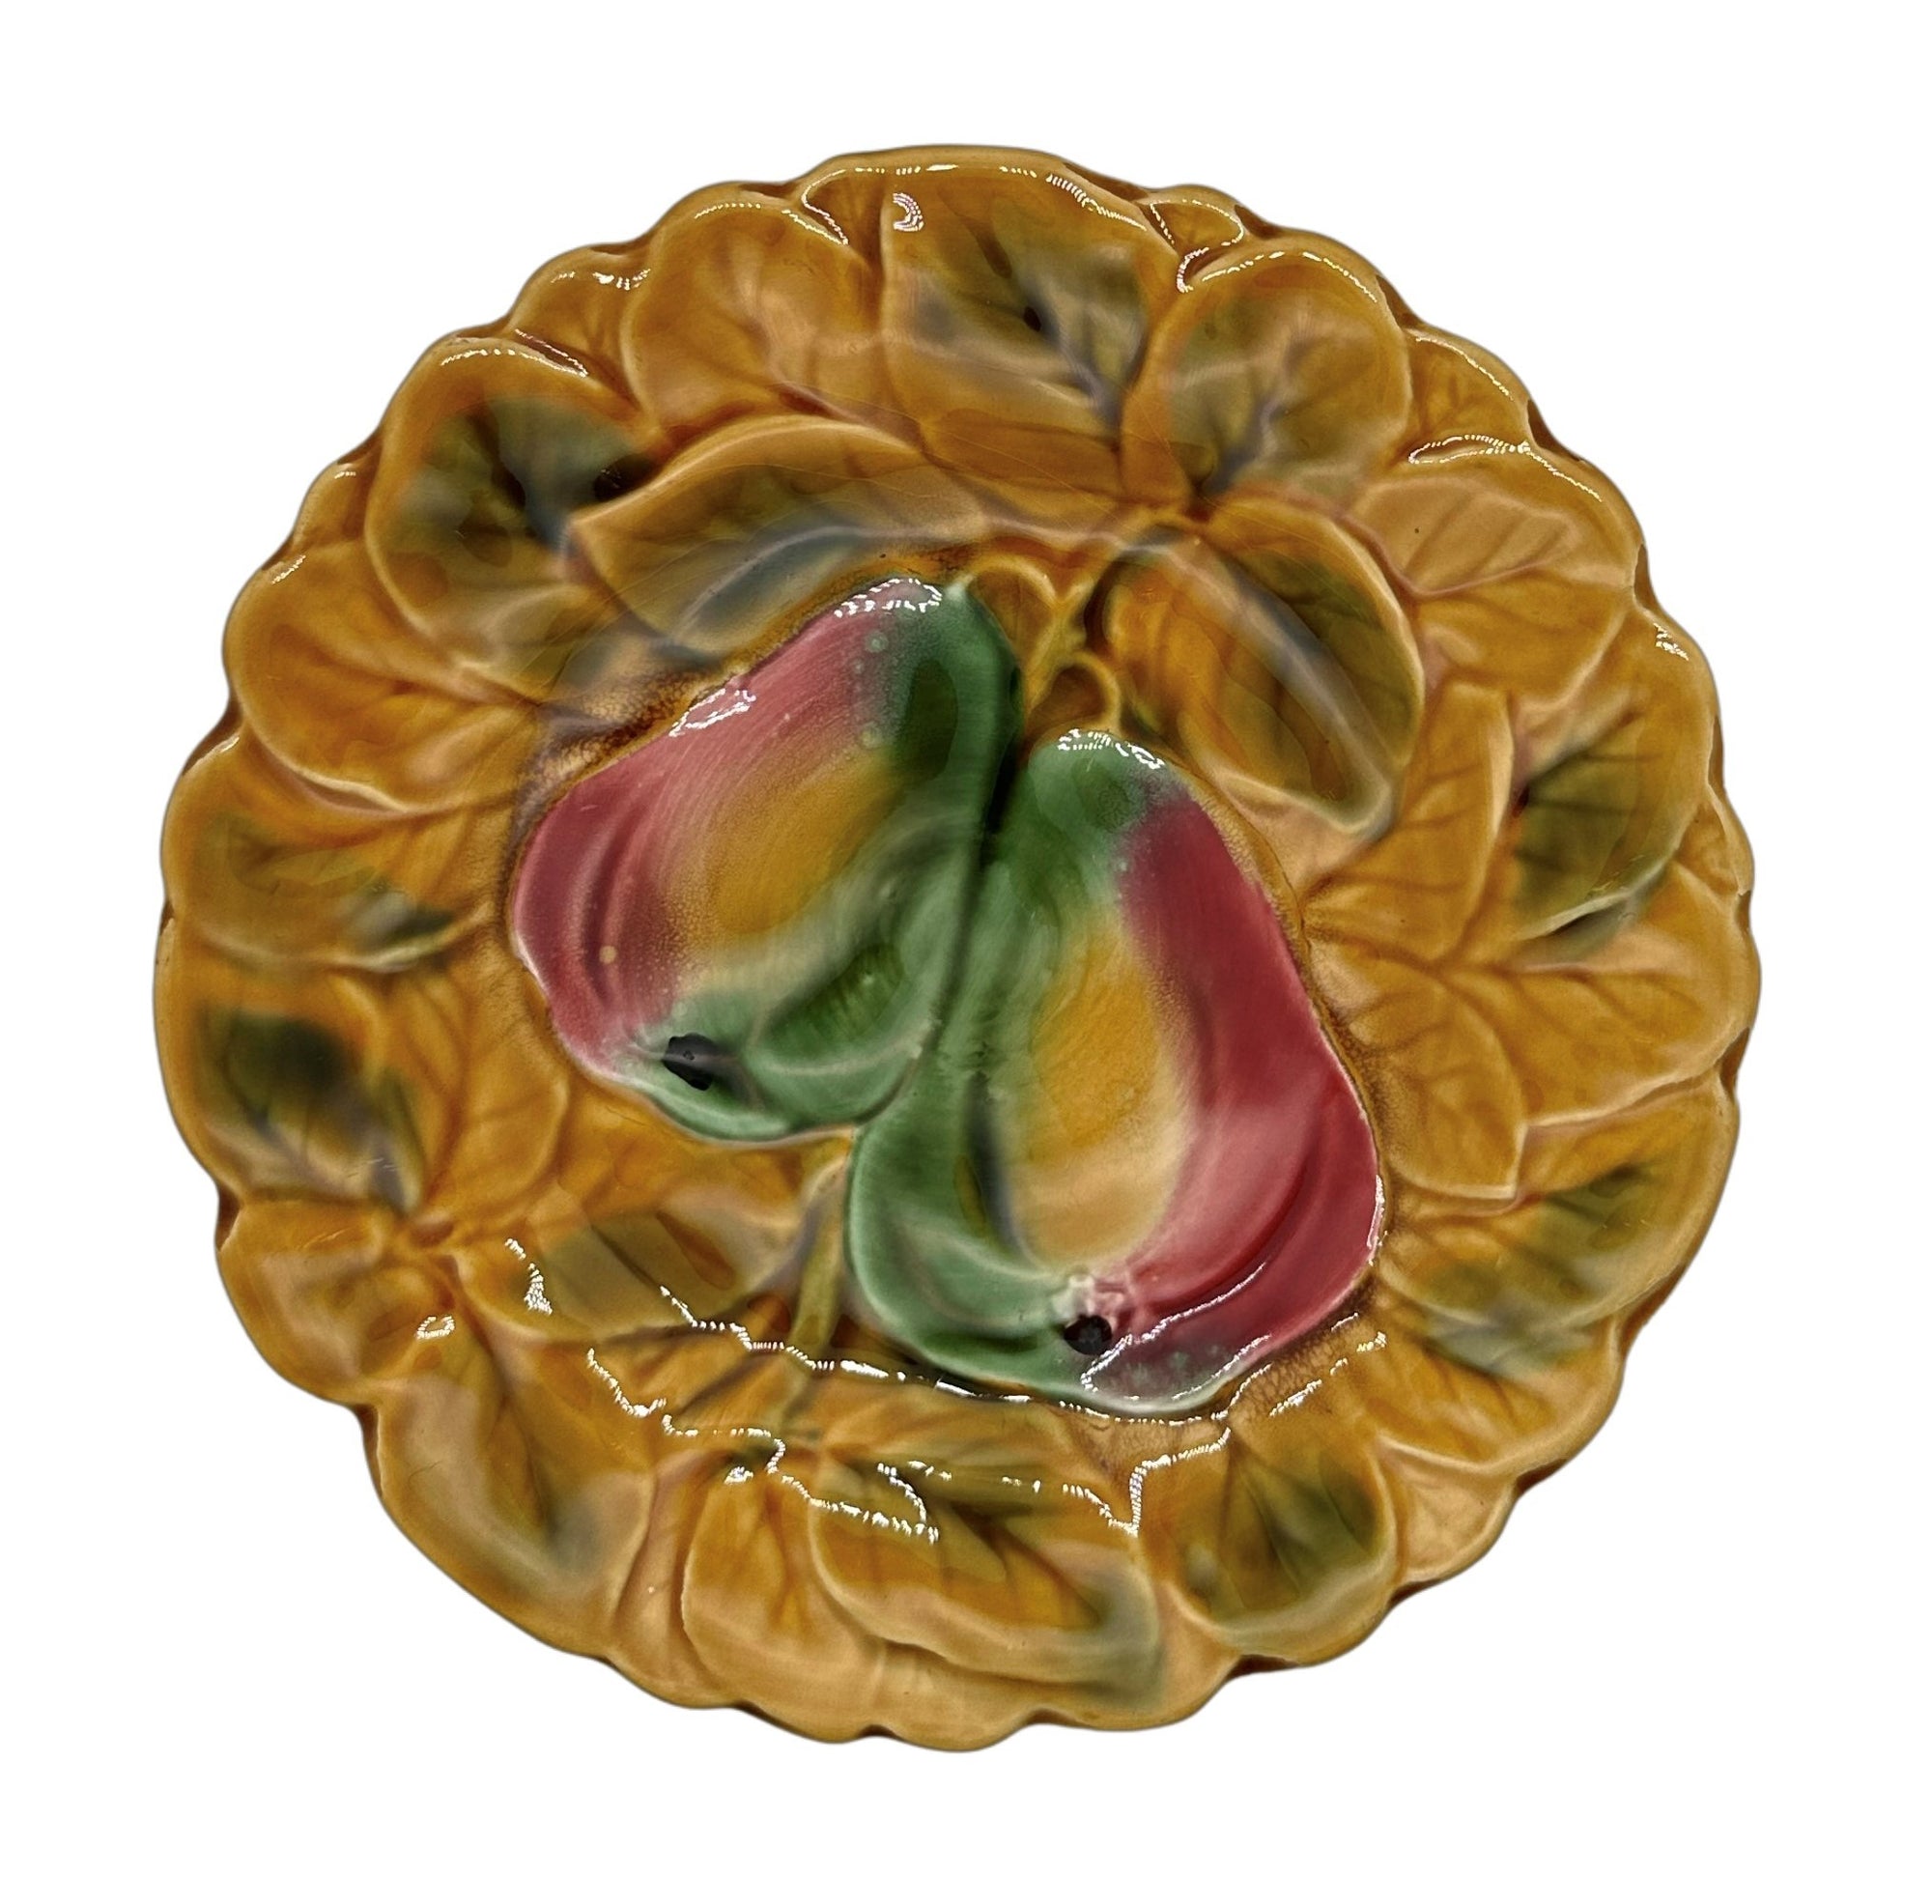 Vintage French Majolica Plate with a Pear Motif in the middle 